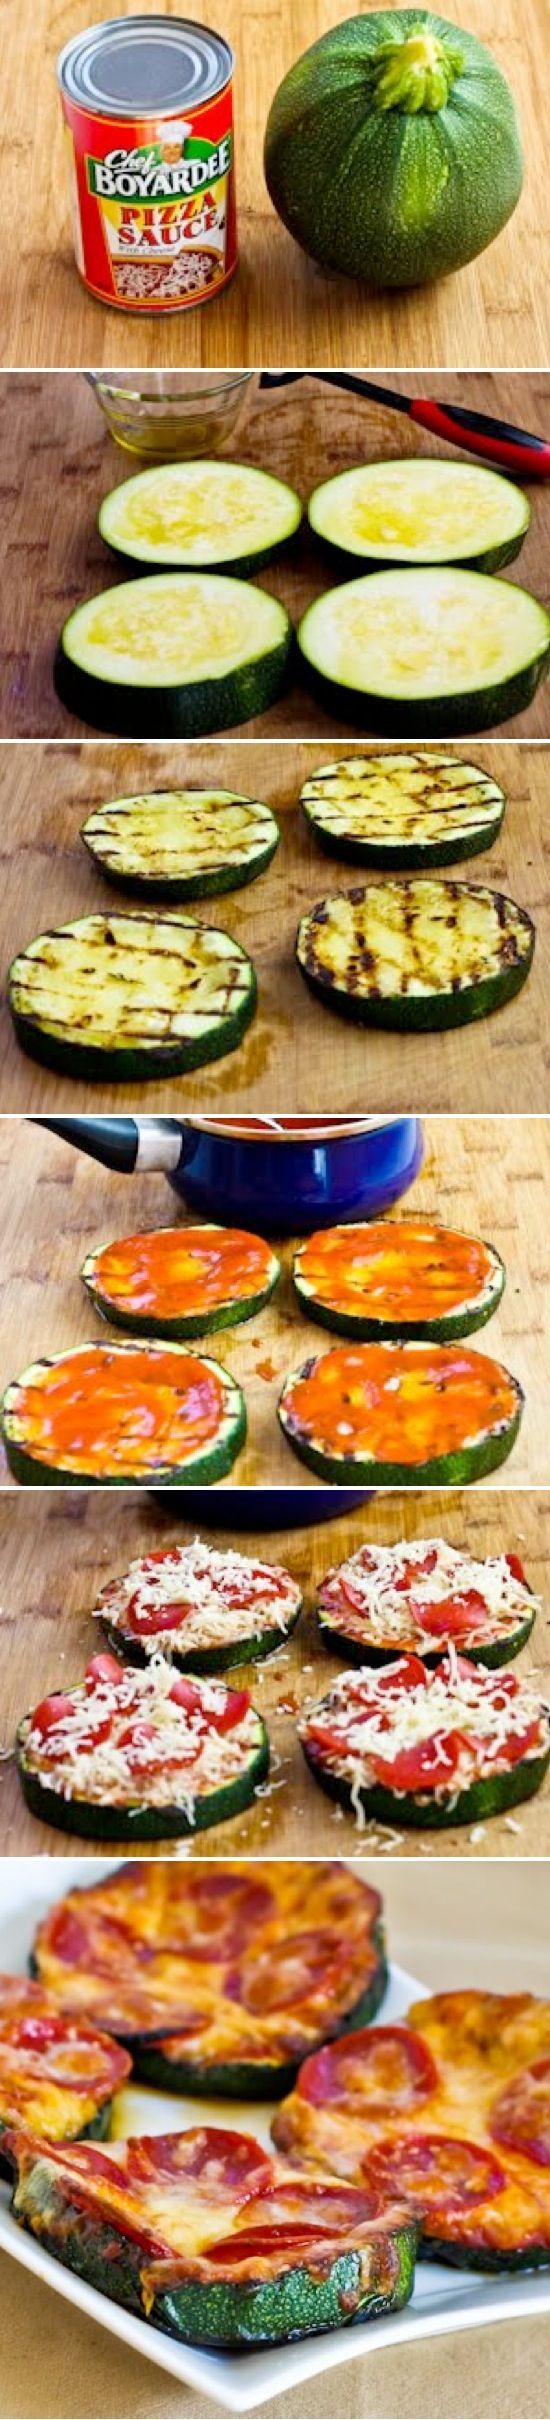 Low Carb Grilled Zucchini Pizza